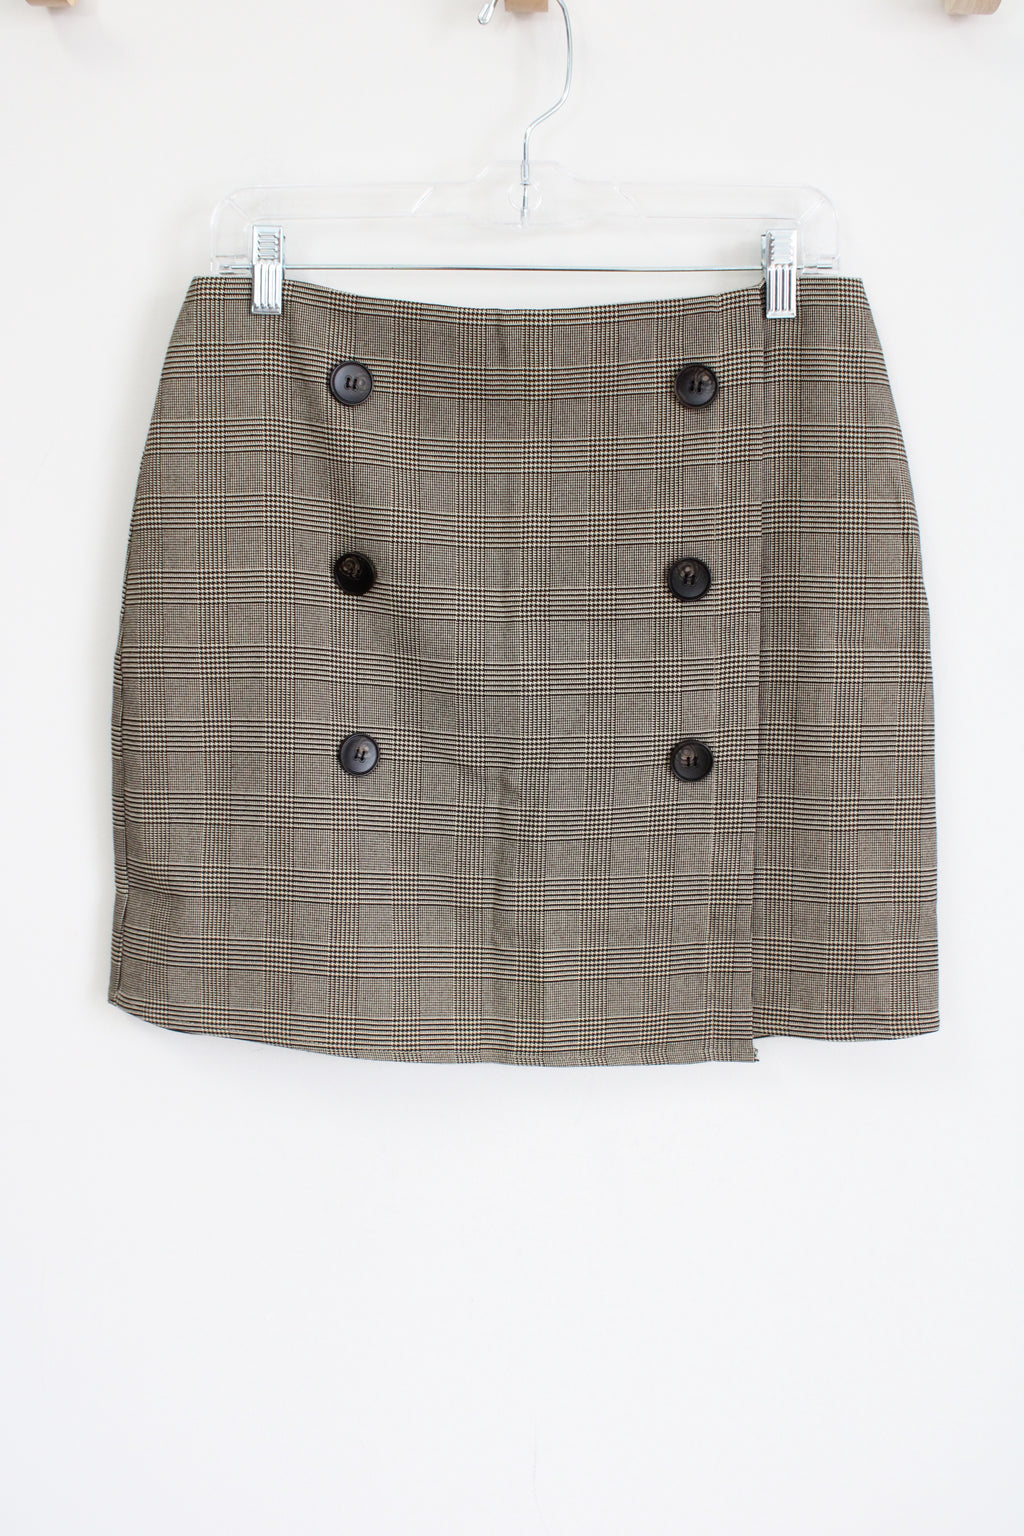 Everly Black Tan Houndstooth Skirt | L